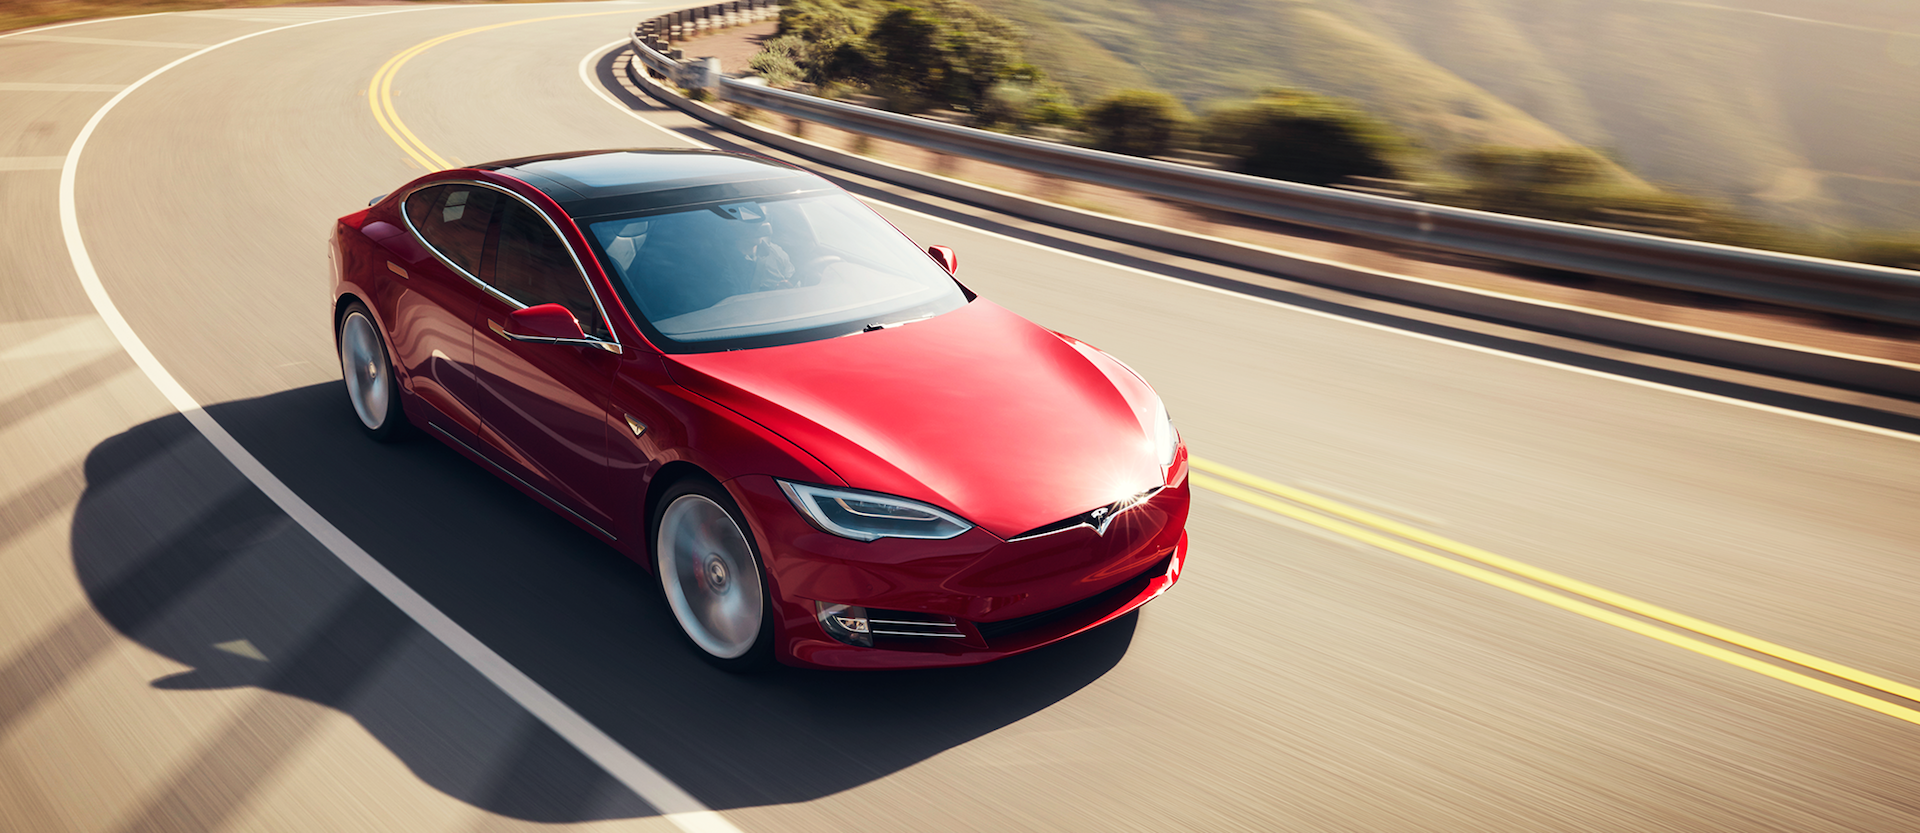 Tesla to Increase Prices for Model S, Model X 100D and P100D